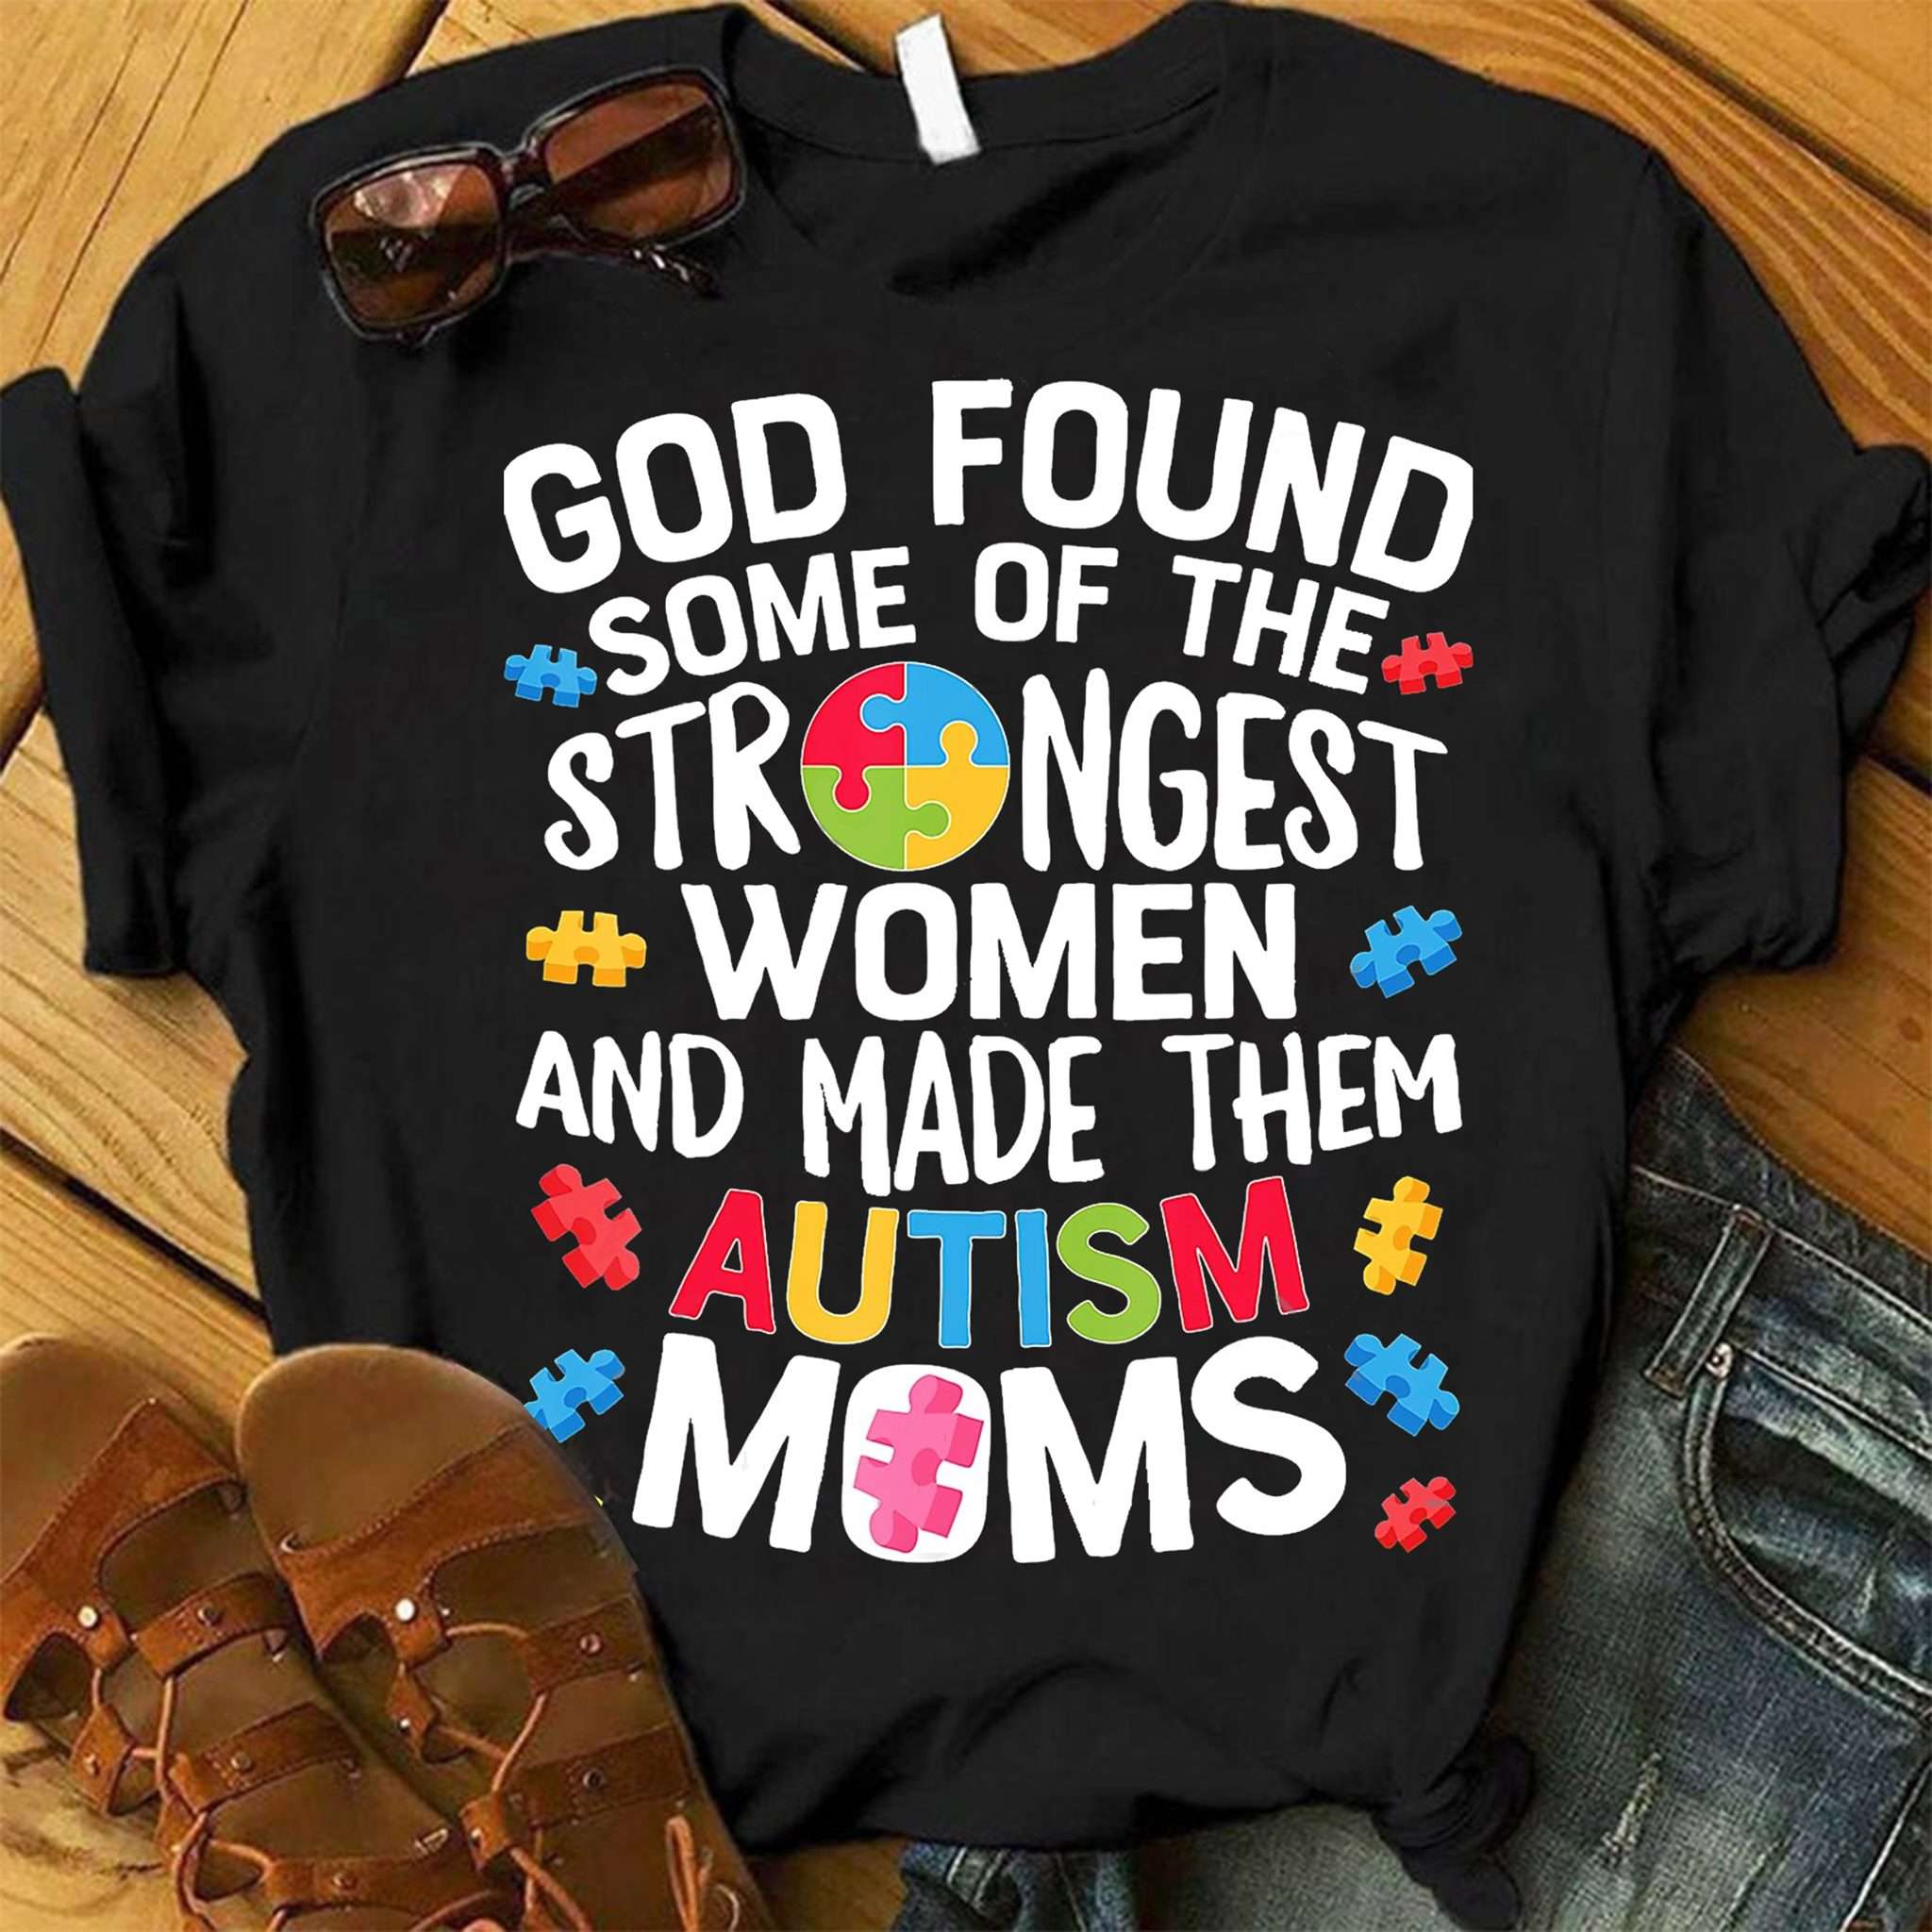 God found some of the strongest women and made them autism moms - Autism awareness